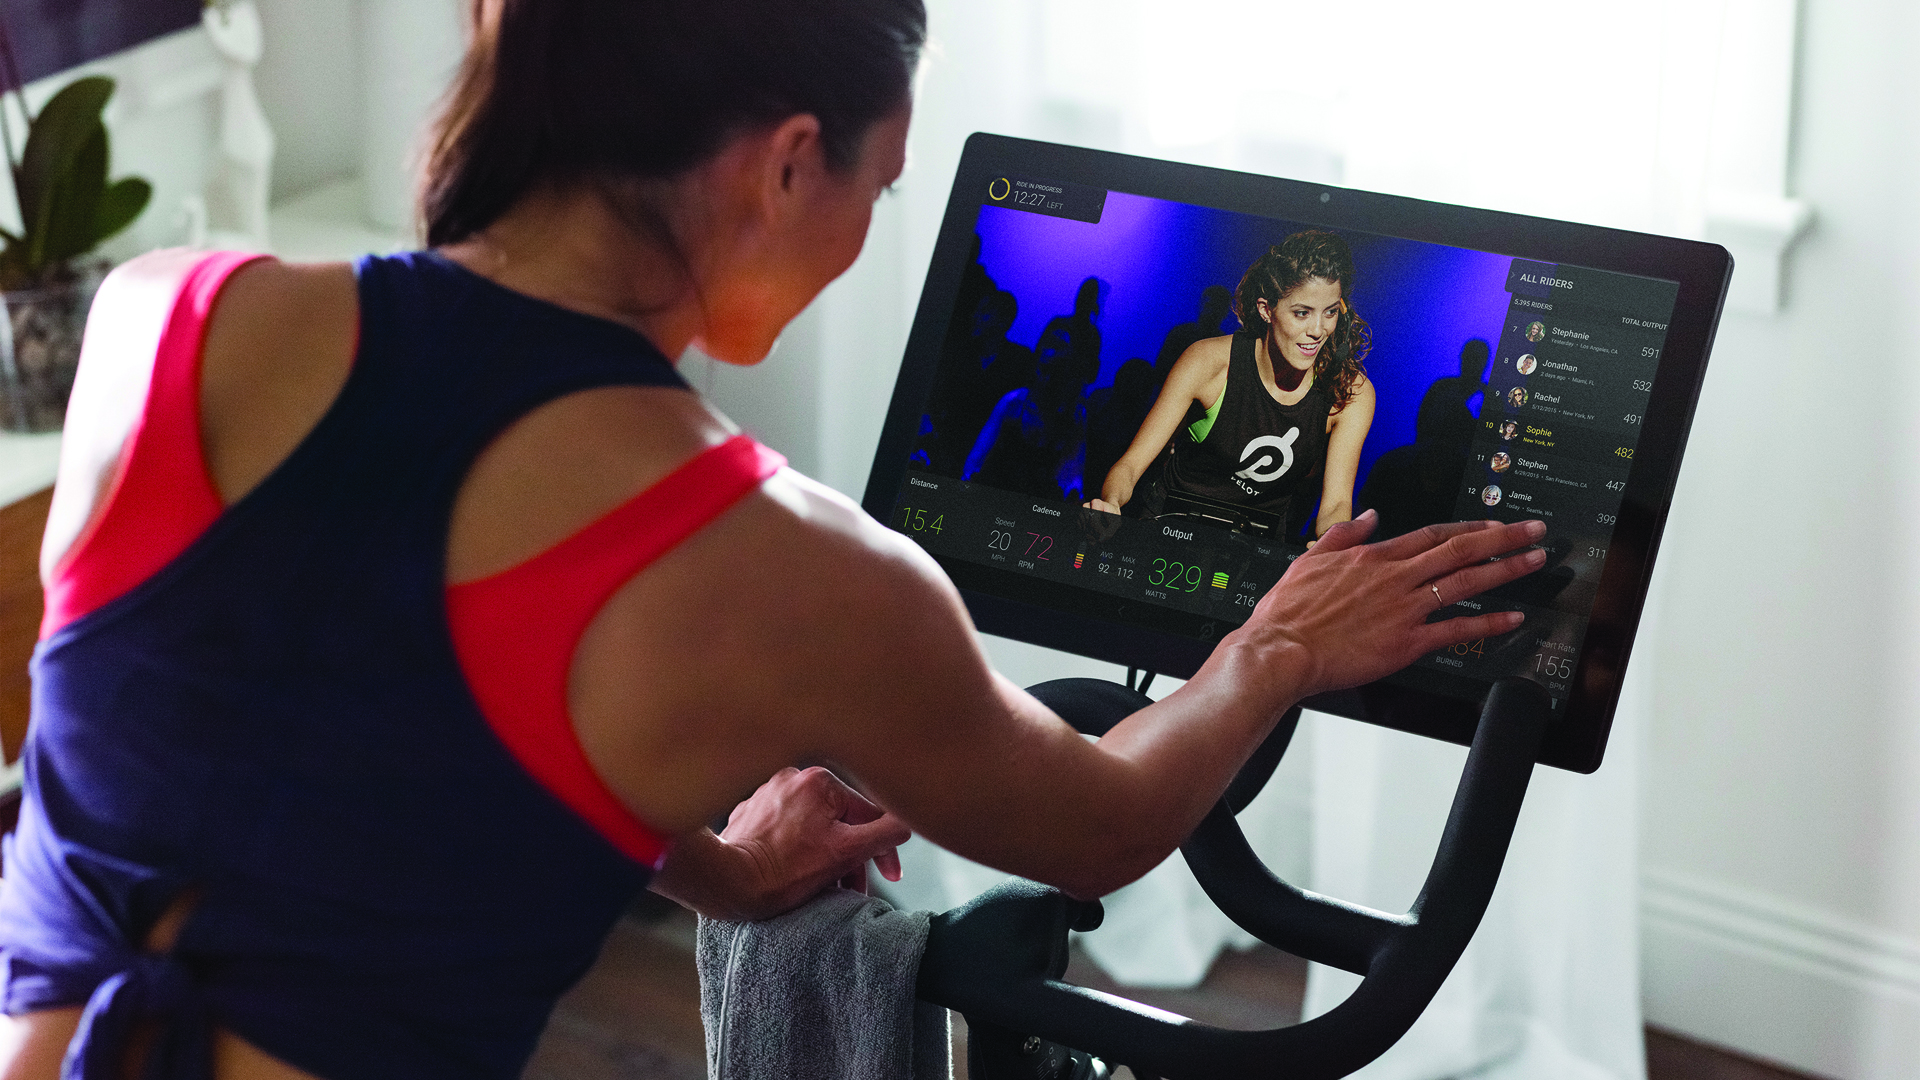 spin bike with interactive screen